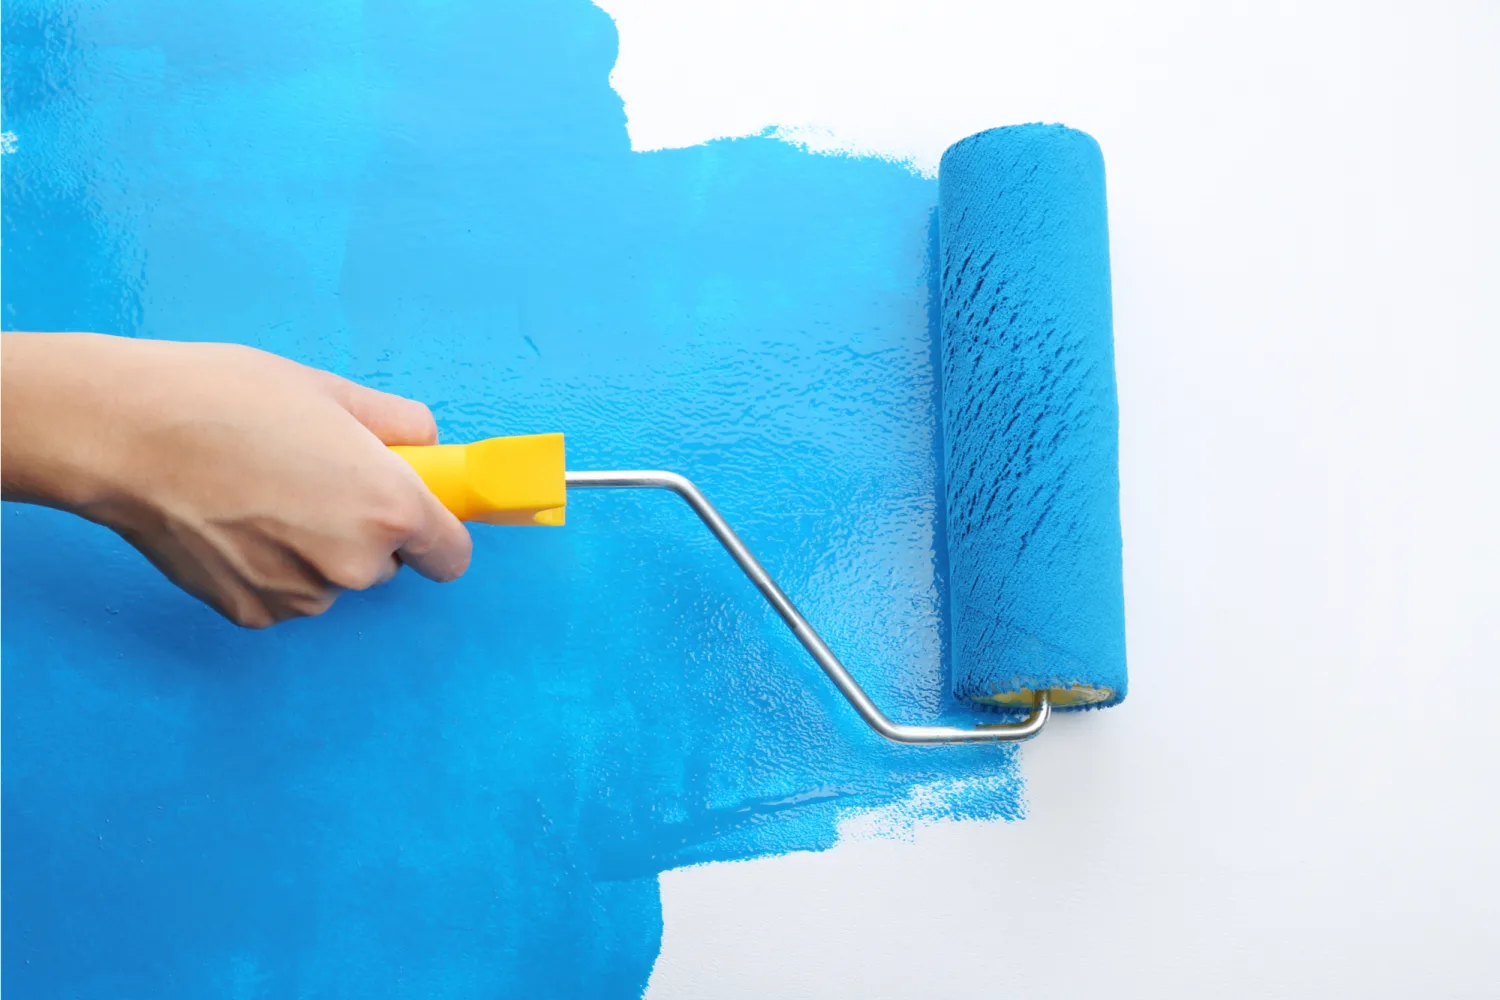 Painter painting wall with roller Procoat Painting San Diego - This is the ultimate guide to house painting. Everything involving house painting has been covered so that house painting can be done easily by you. - Painting Fences, Gates, & Garages by Procoat Painting San Diego We offer you a complete line of professional interior and exterior painting services.